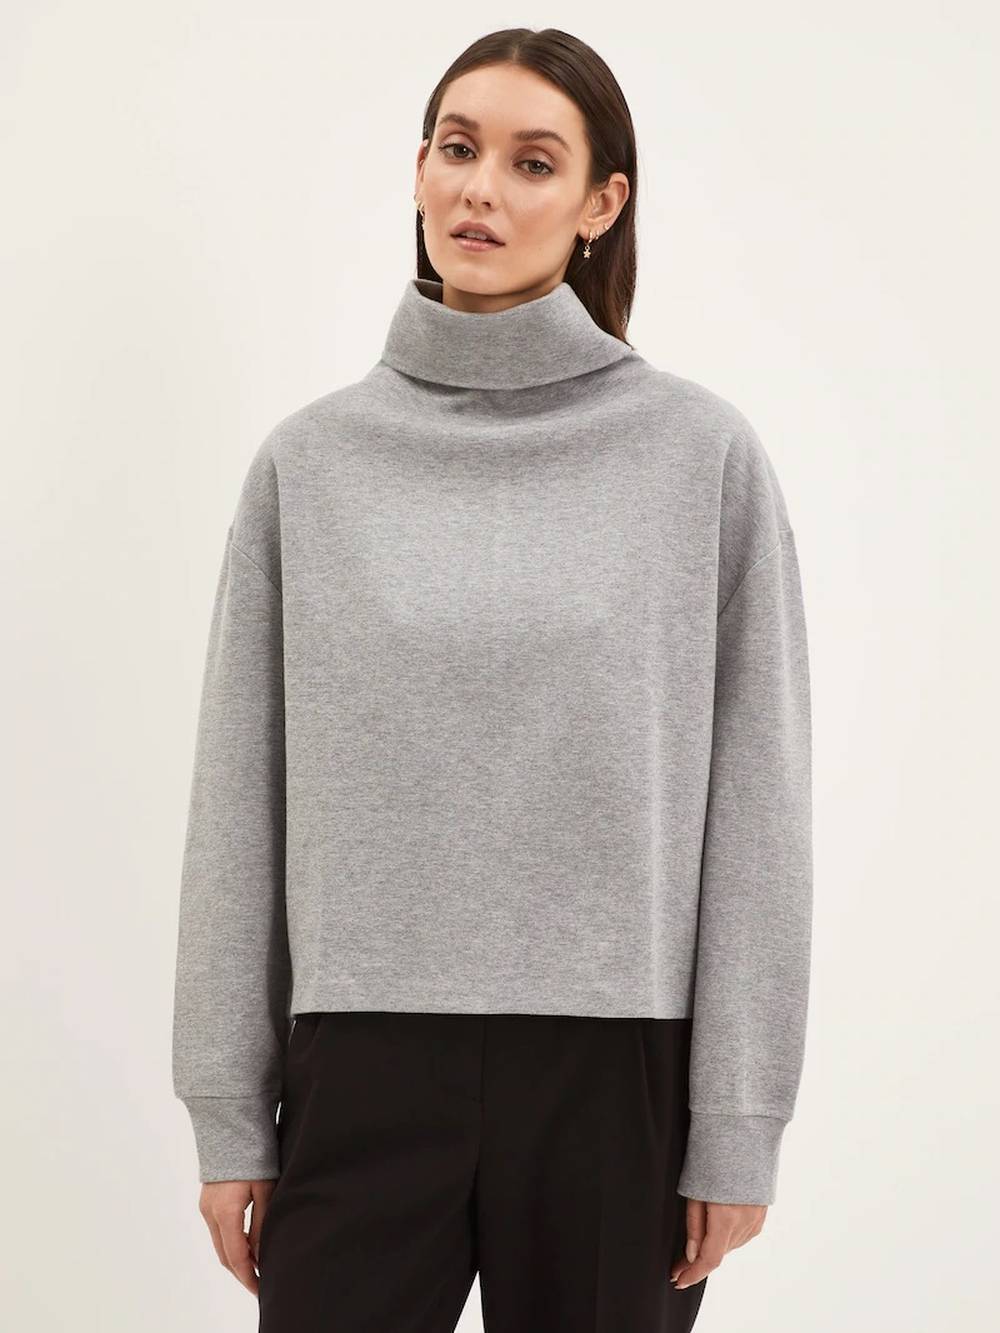 15 Best Affordable And Ethically Made Turtlenecks | Panaprium